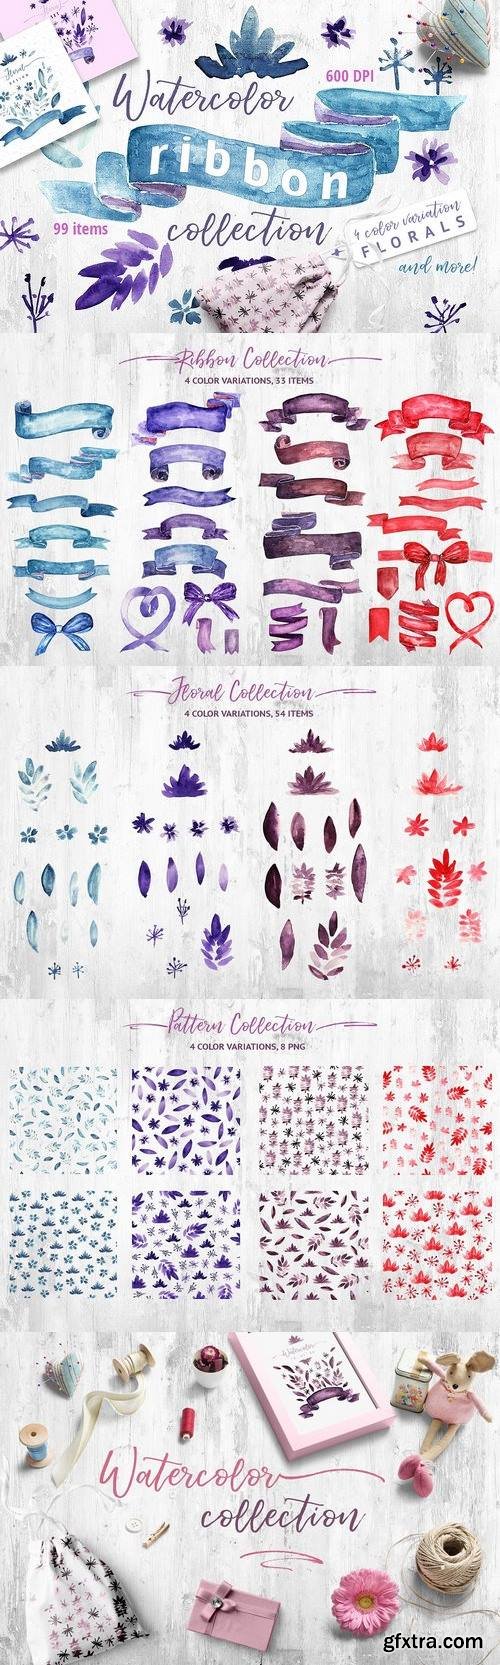 CM - Watercolor Ribbon Collection 1982659